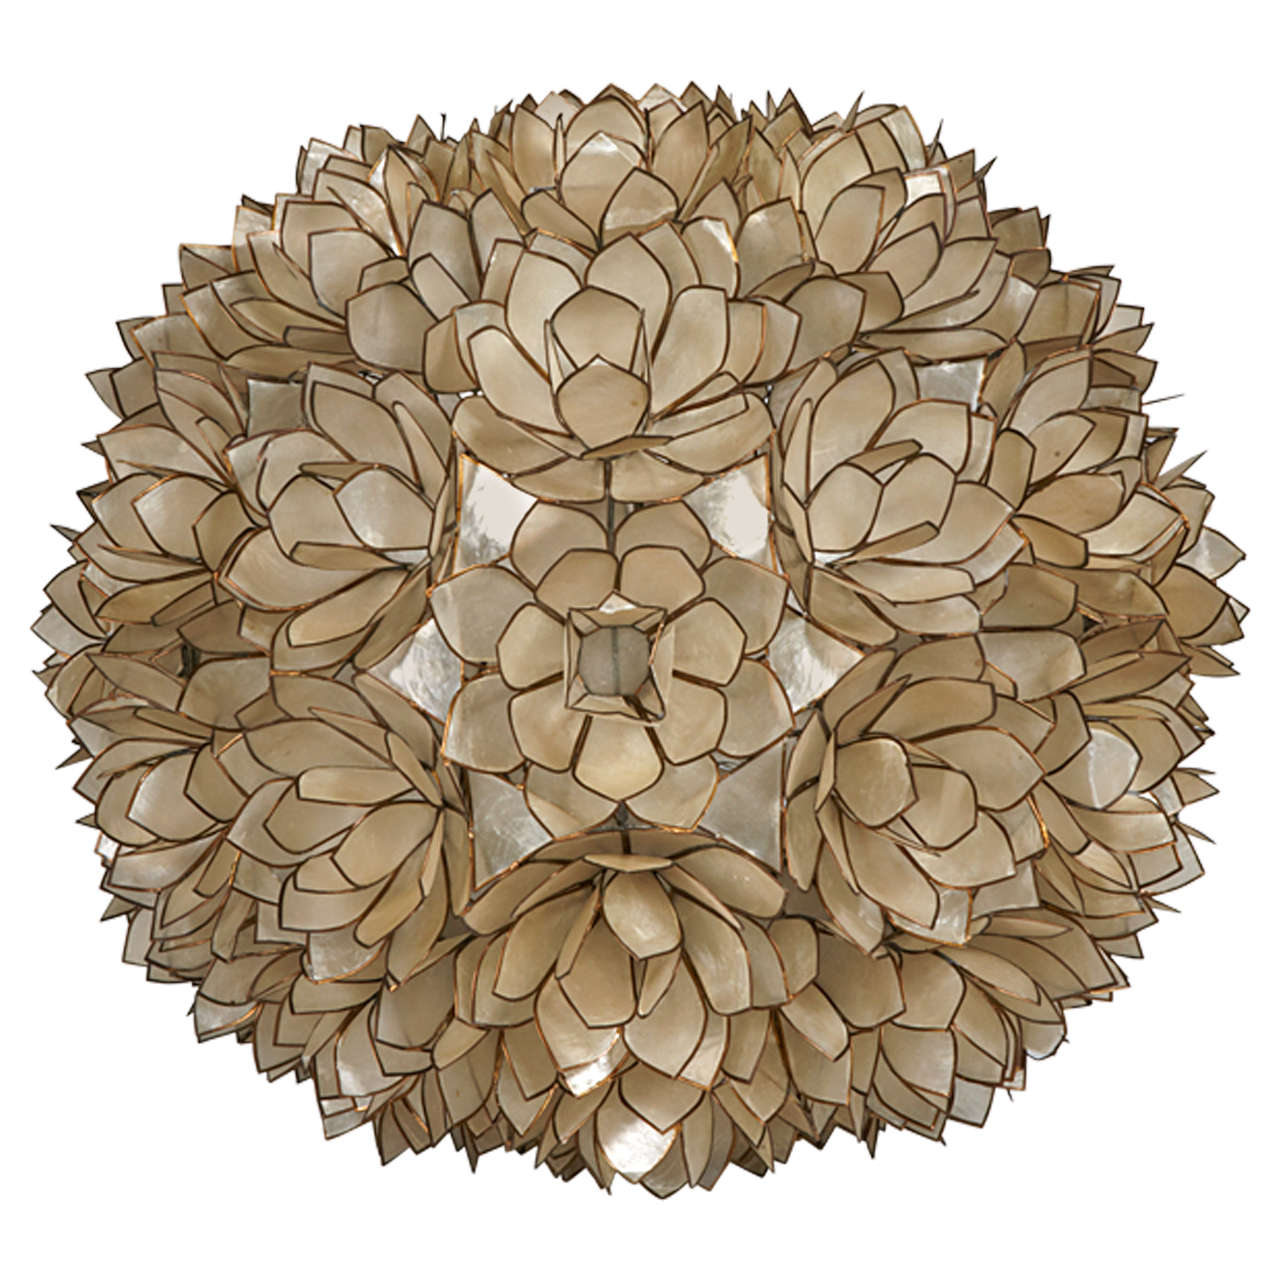 A 1970 Chandelier Made in Mother-of-Pearl Lotus Flowers